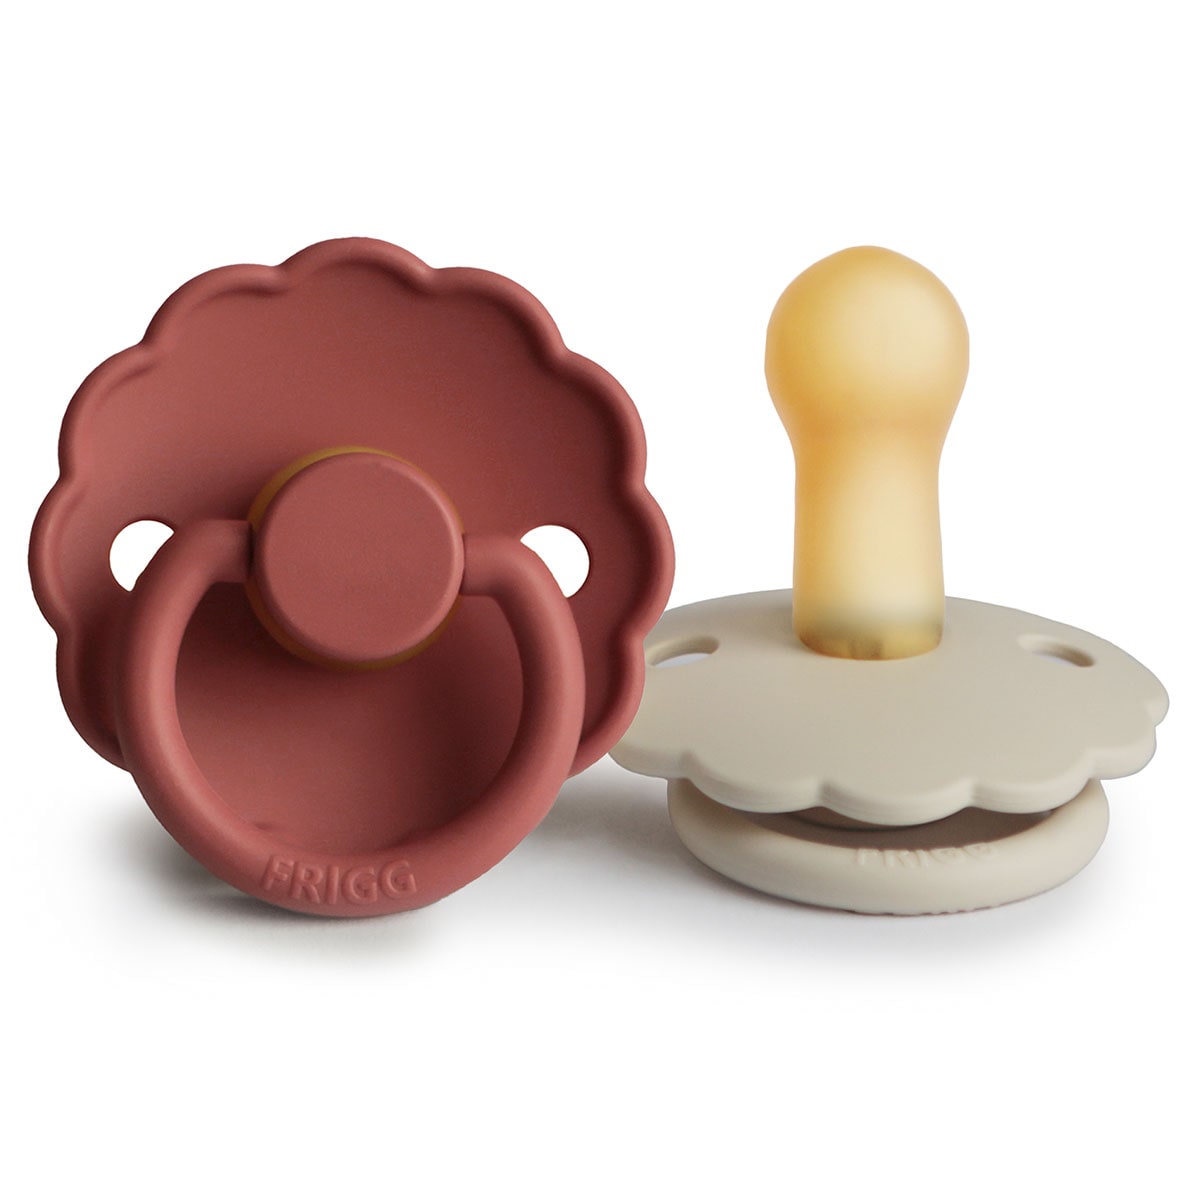 Frigg 6-18 Months Daisy Pacifier Baked Clay/Cream 2 Pack